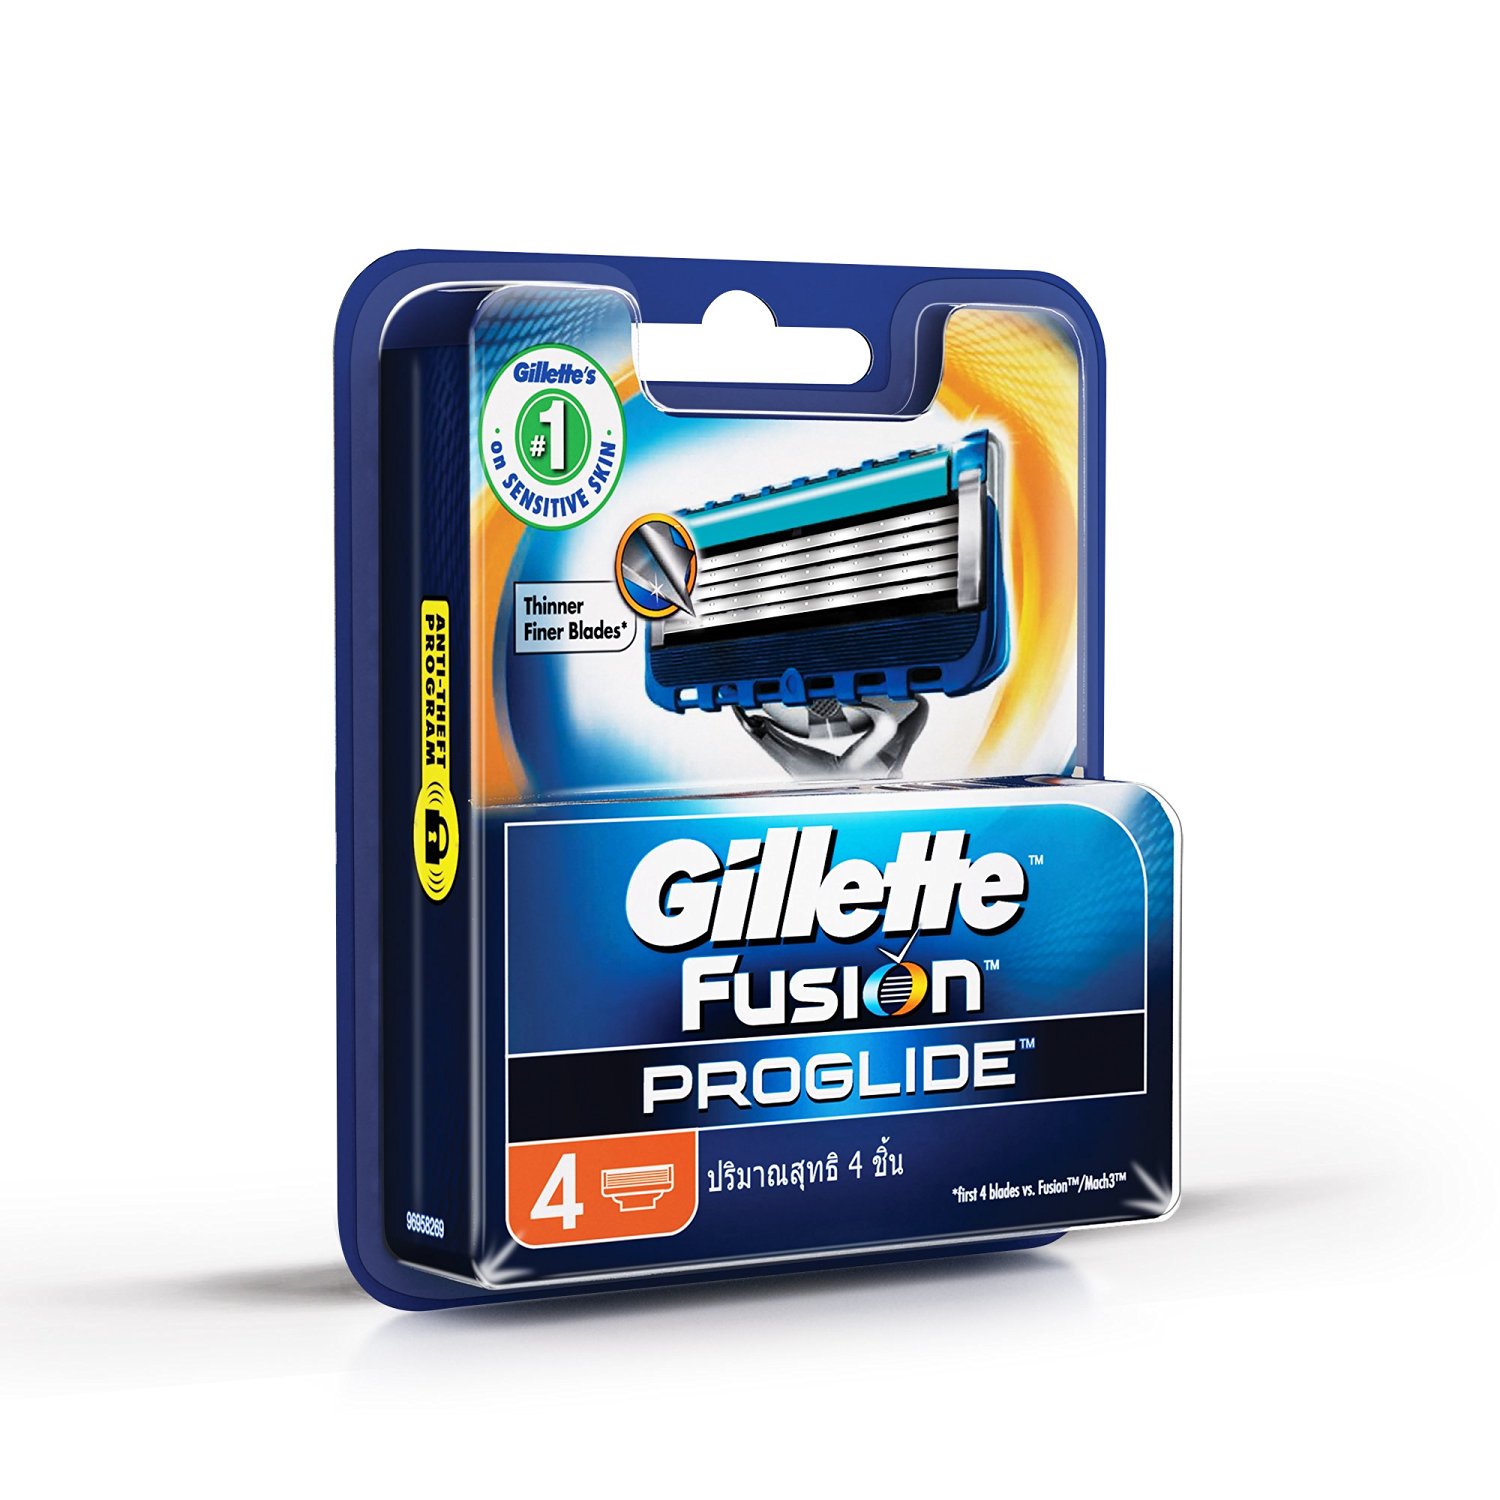 Buy Gillette Flexball Fusion Proglide Blades 4 Cartridges Online ₹699 From Shopclues